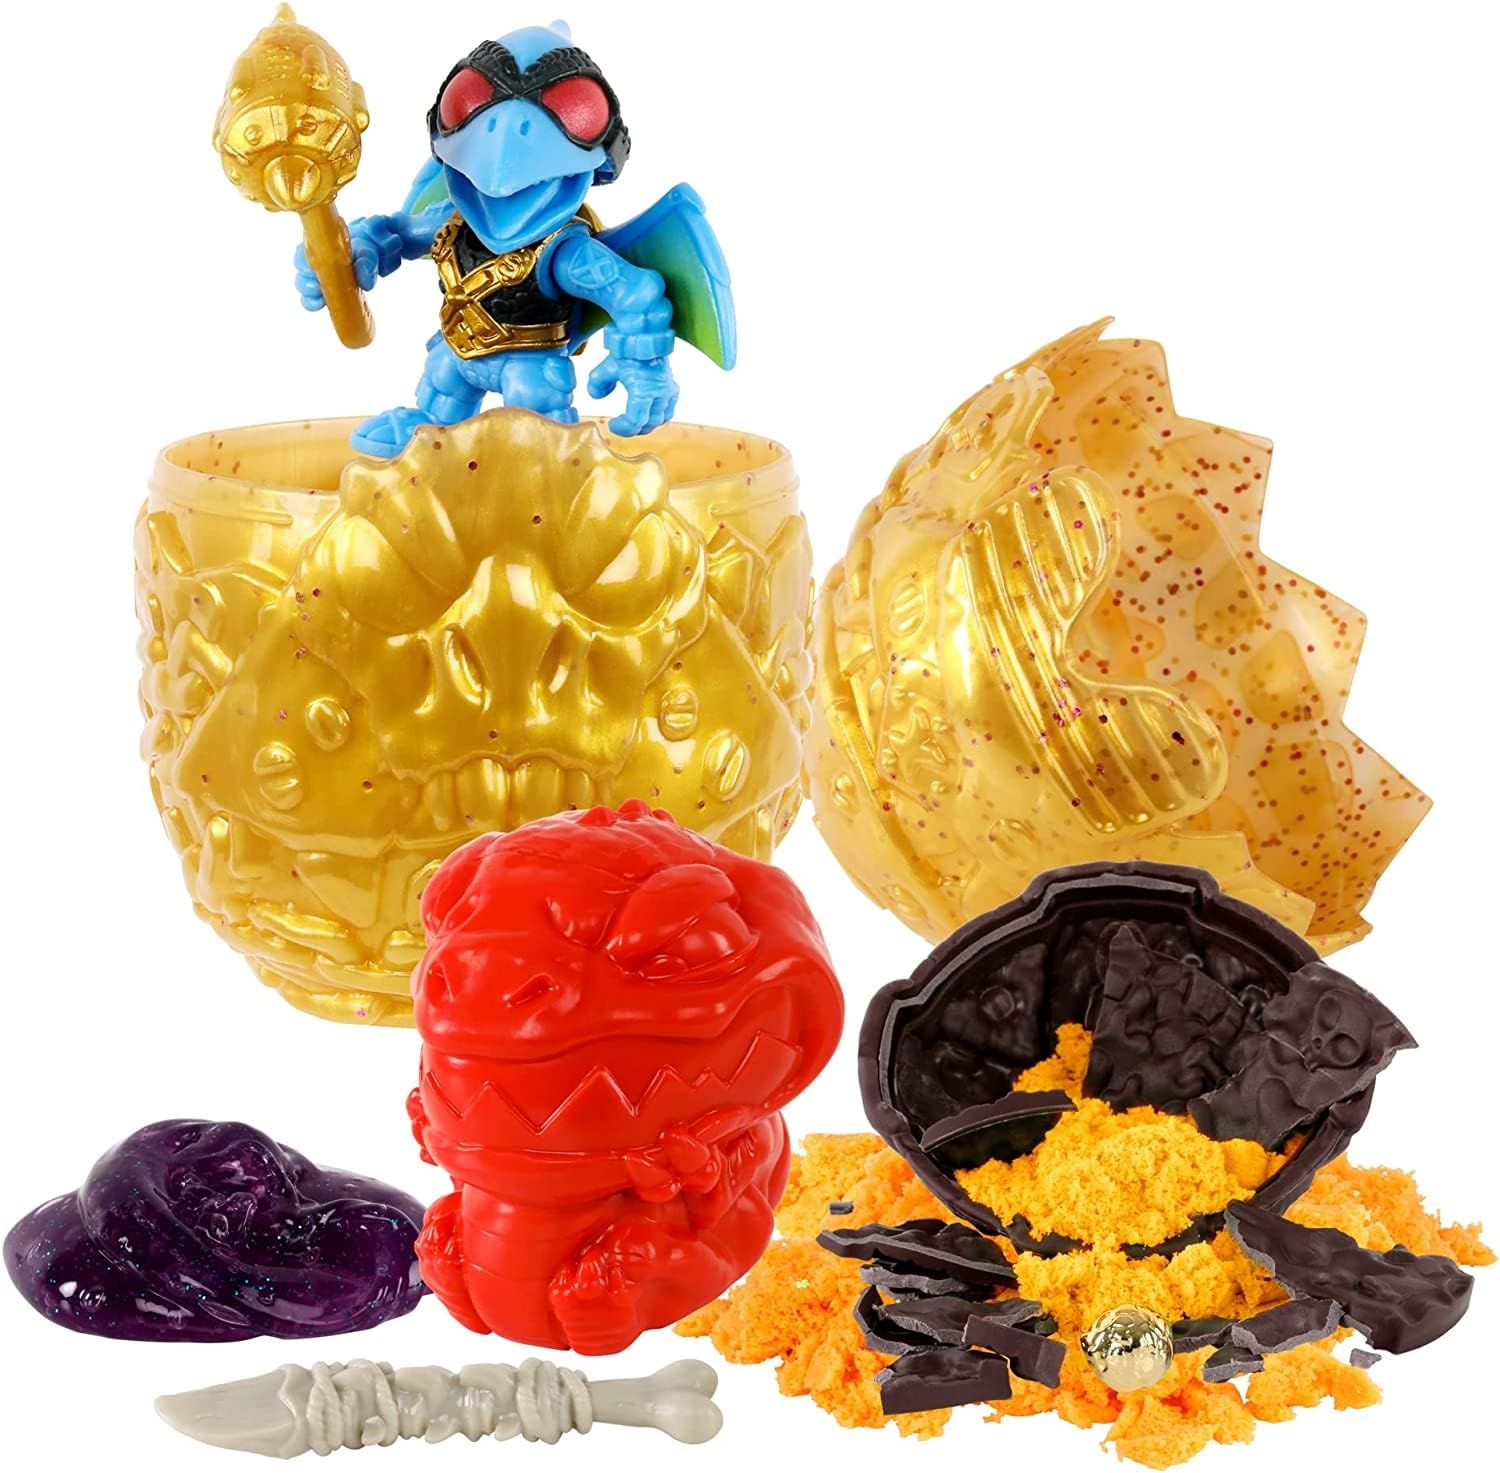 Treasure X Dino Gold Armored Egg. Break The Egg. Squeeze The Ooze Out. Smash The Fossil to Find The Treasure. Then Build The Dino and Display. Styles May Vary